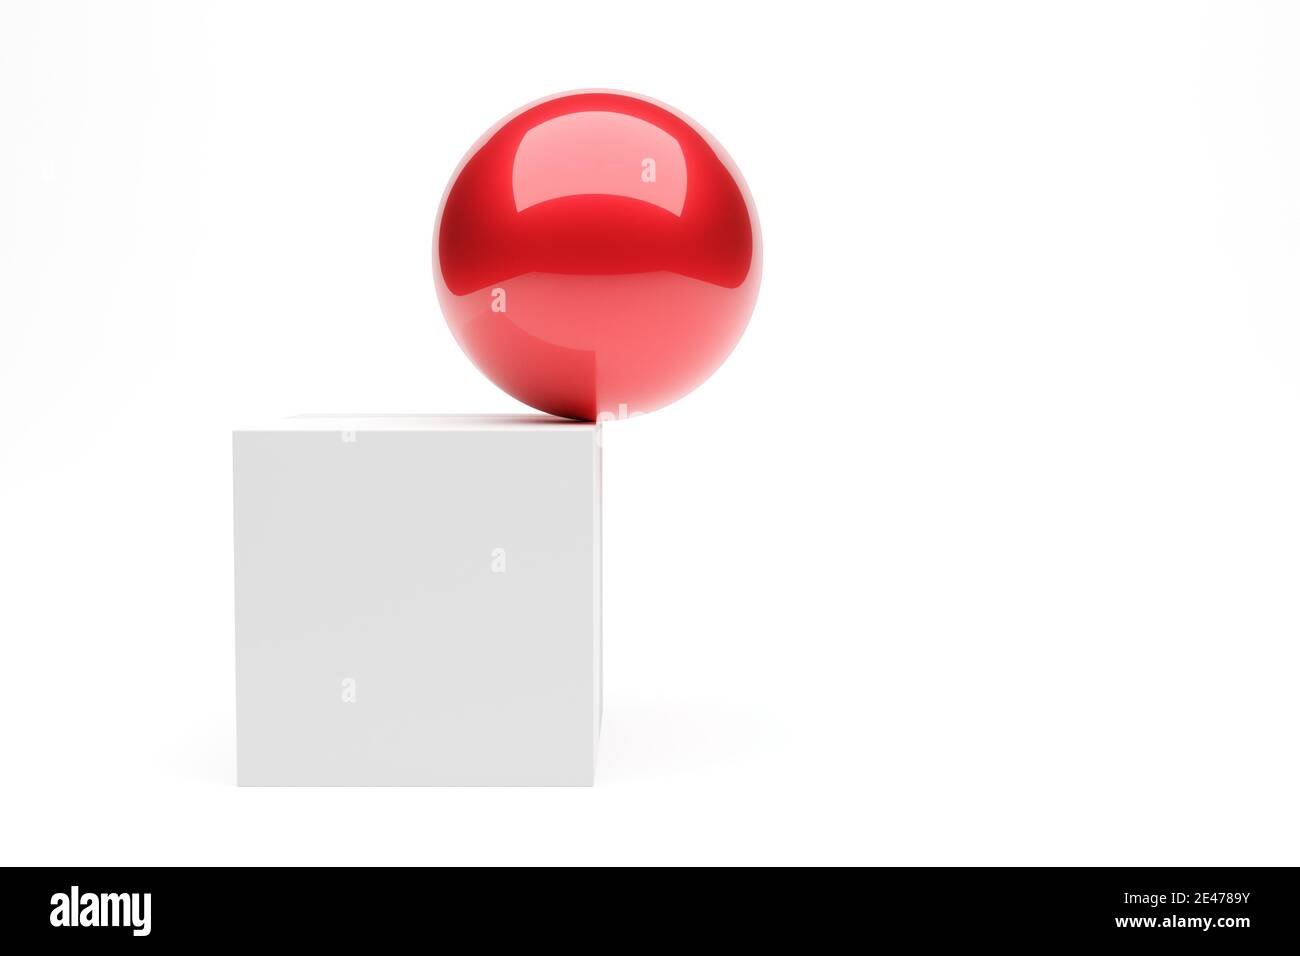 Shiny red sphere in equilibrium on edge of white cube over white background, stability, accuracy or risk concept, 3D illustration Stock Photo